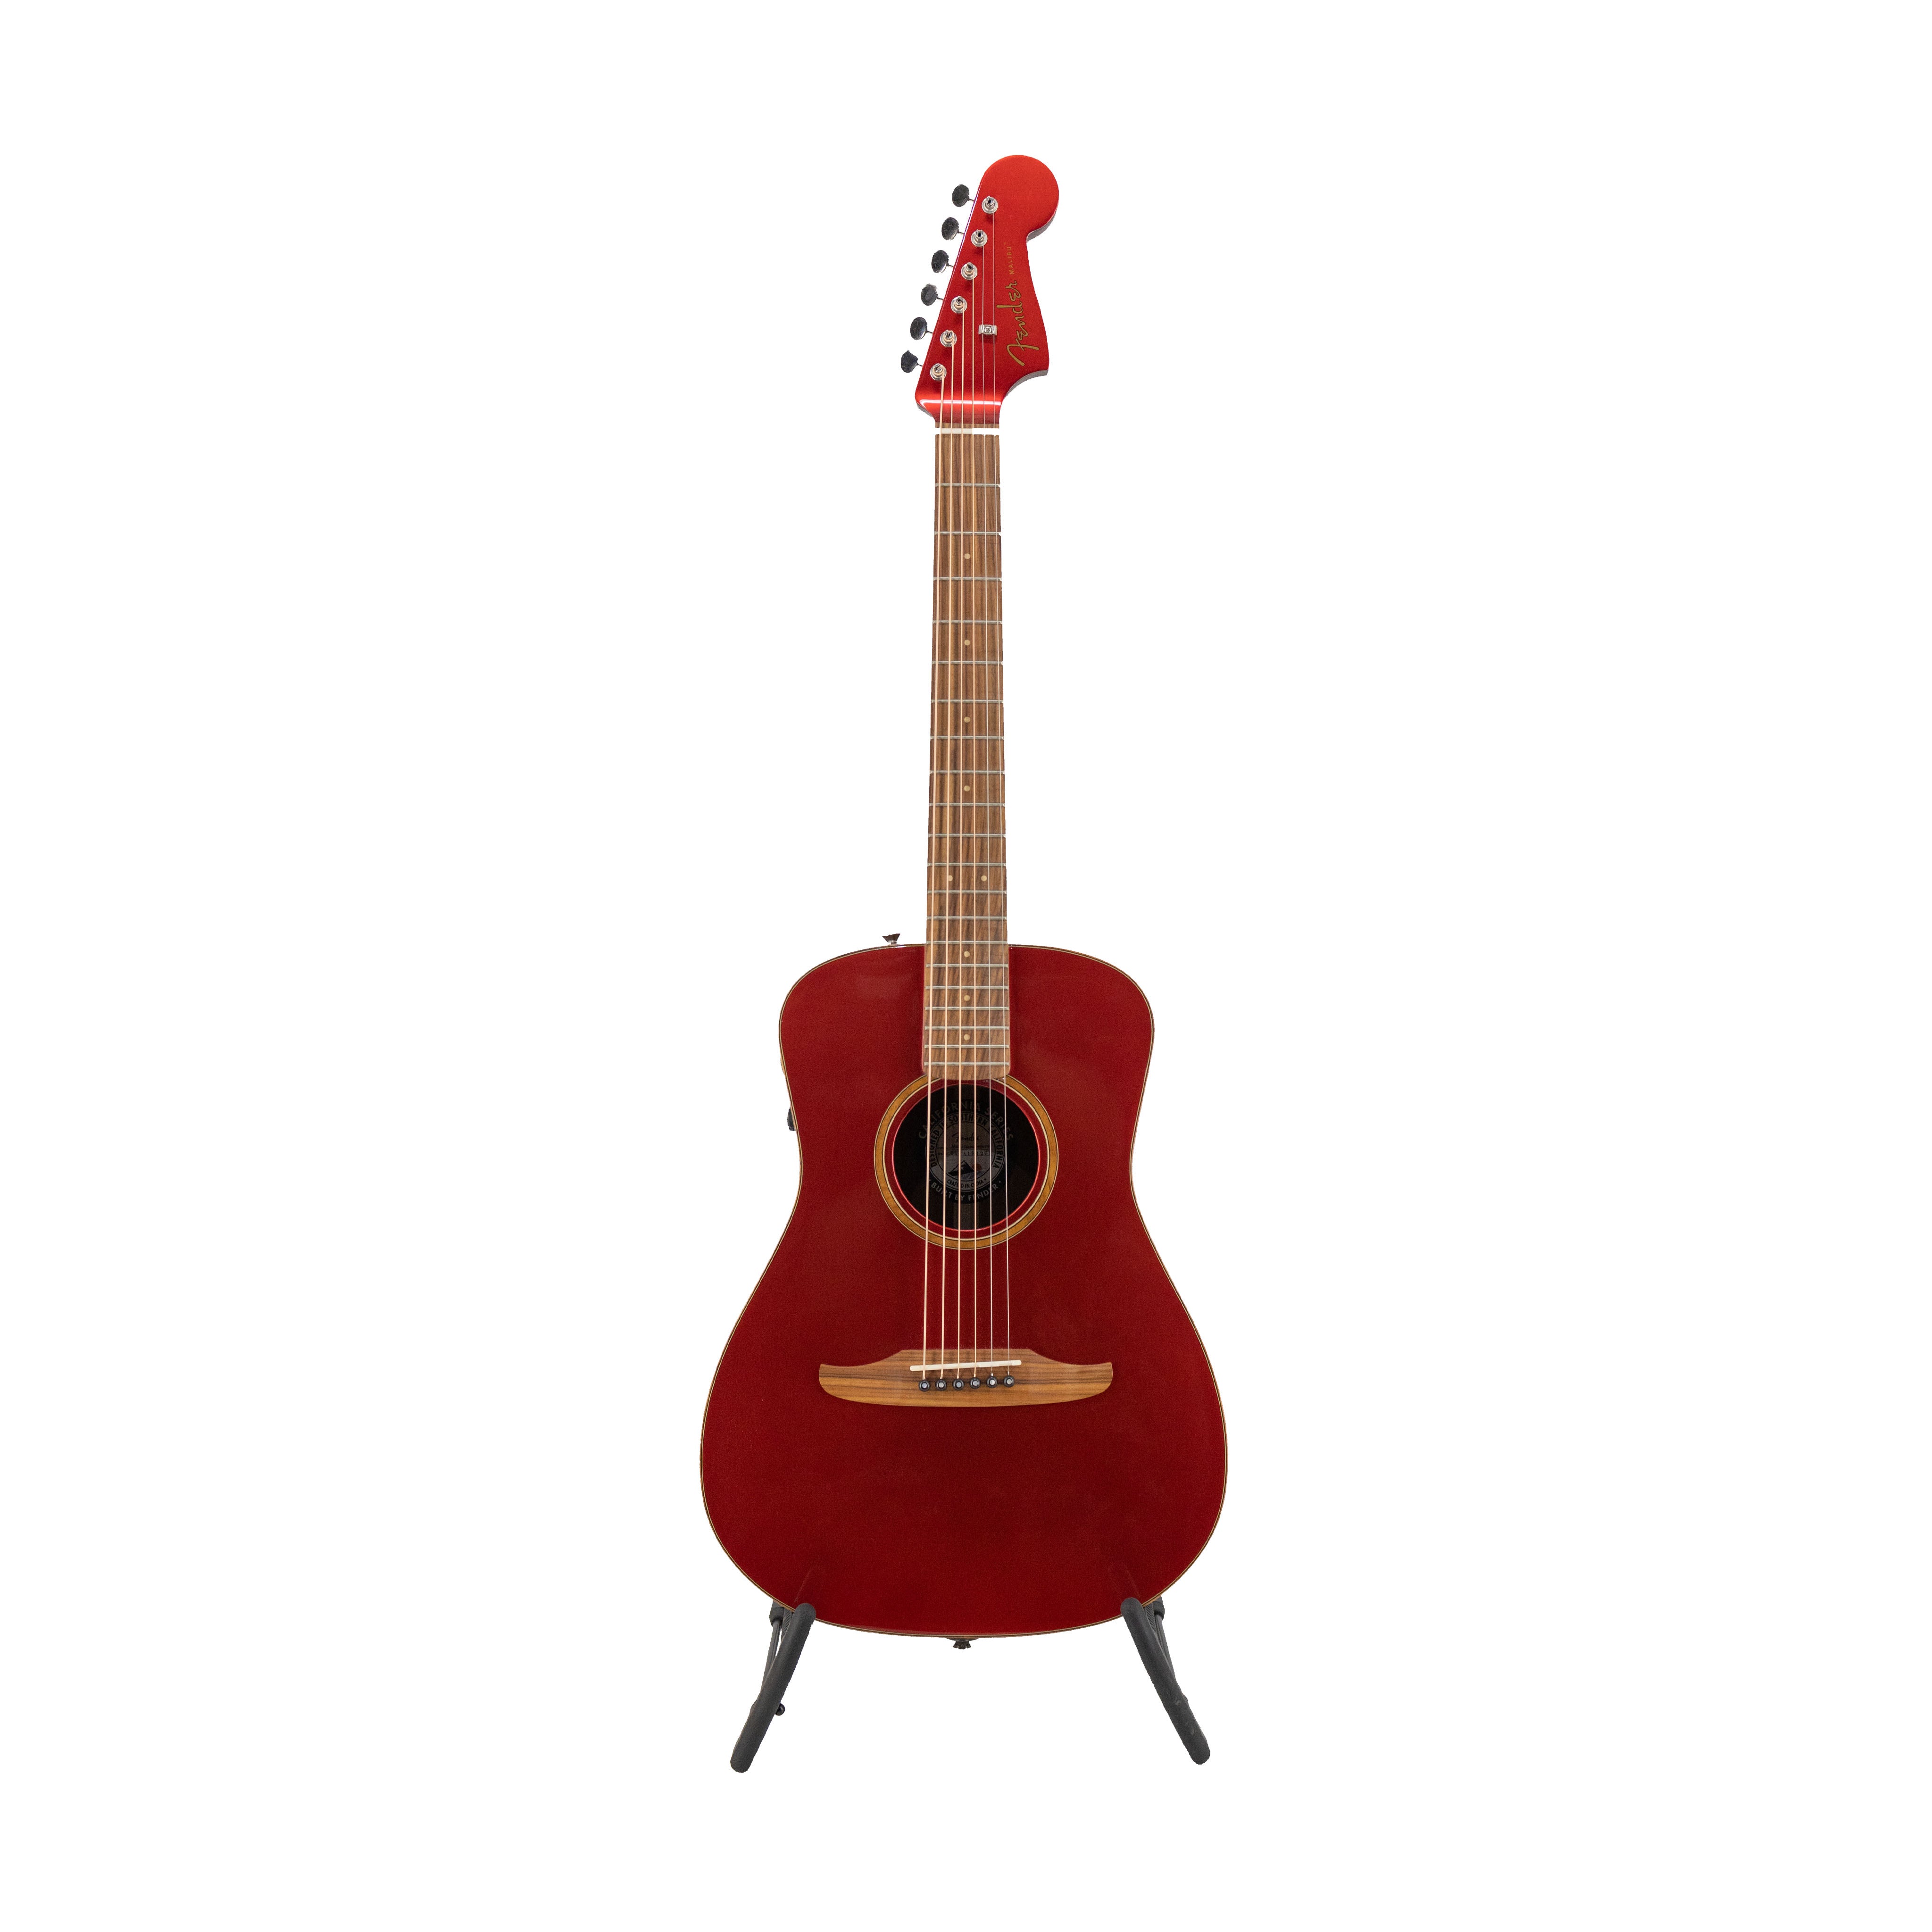 Fender California Malibu Classic Small-Bodied Acoustic Guitar, Hot Rod – Well